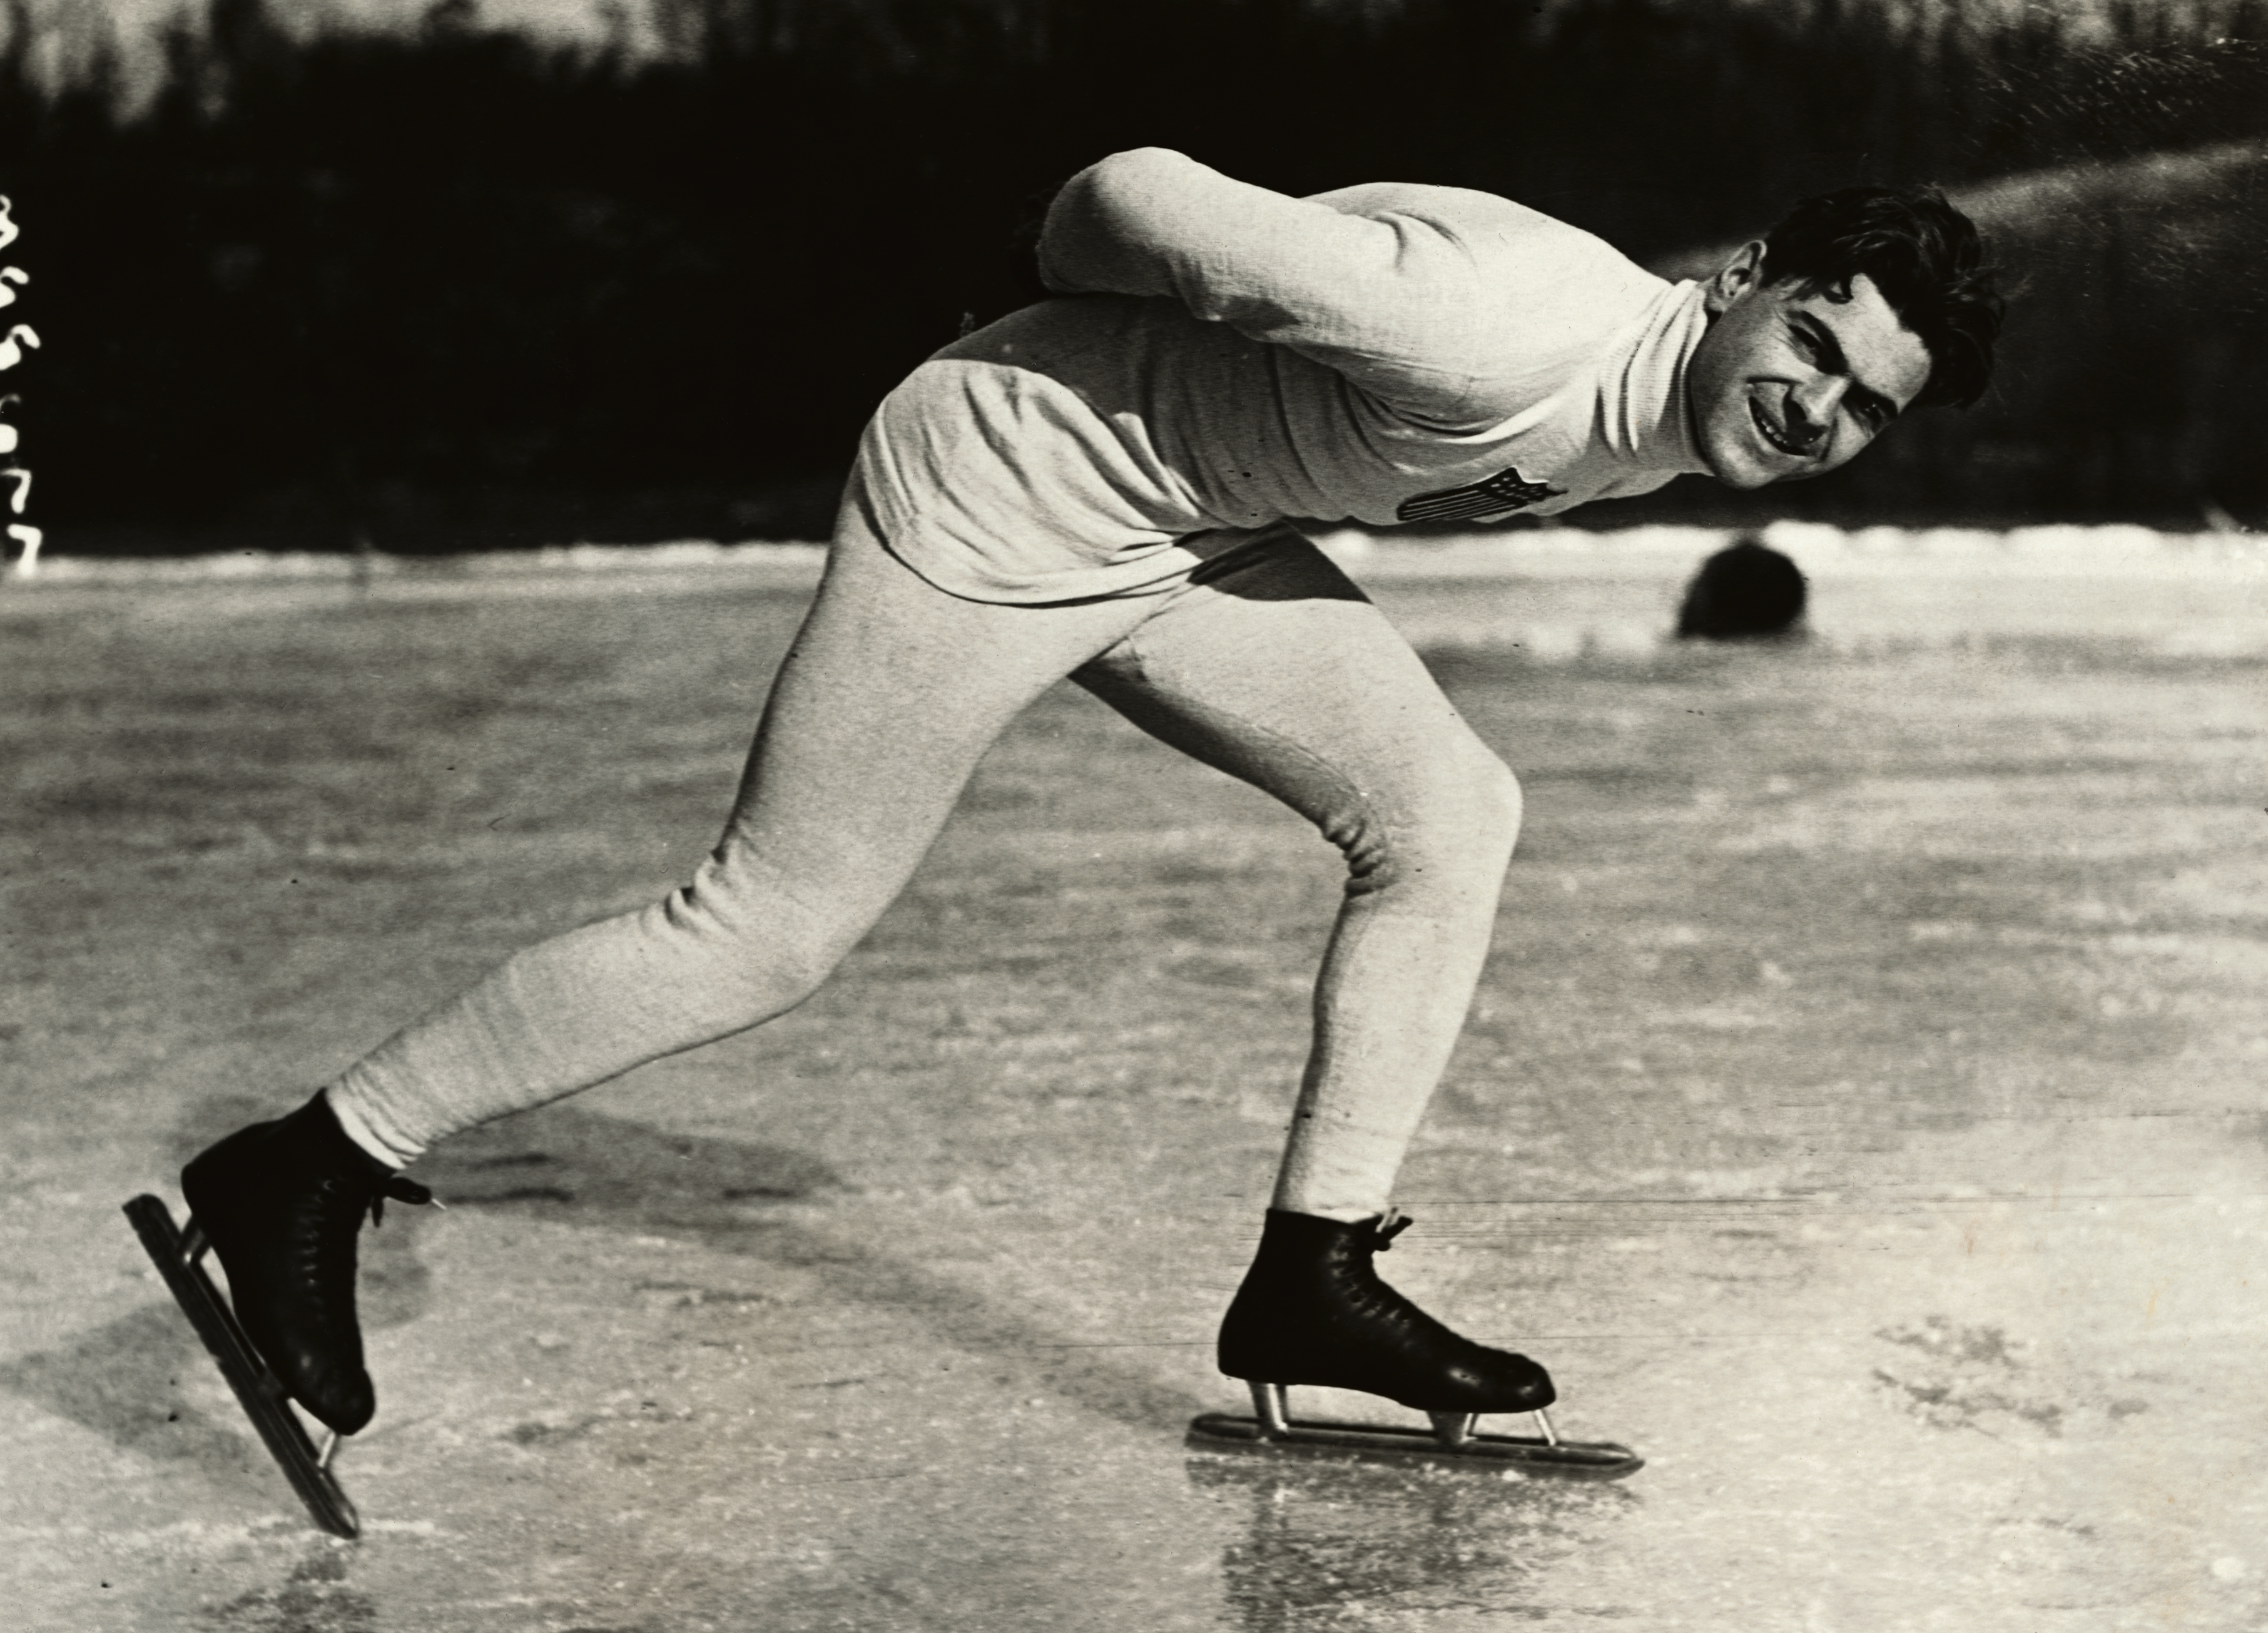 Charles Jewtraw (USA) became the first American to win a gold medal in the first Winter Olympics in 1924 (Photo by George Rinhart/Corbis via Getty Images) (George Rinhart&mdash;Corbis via Getty Images)